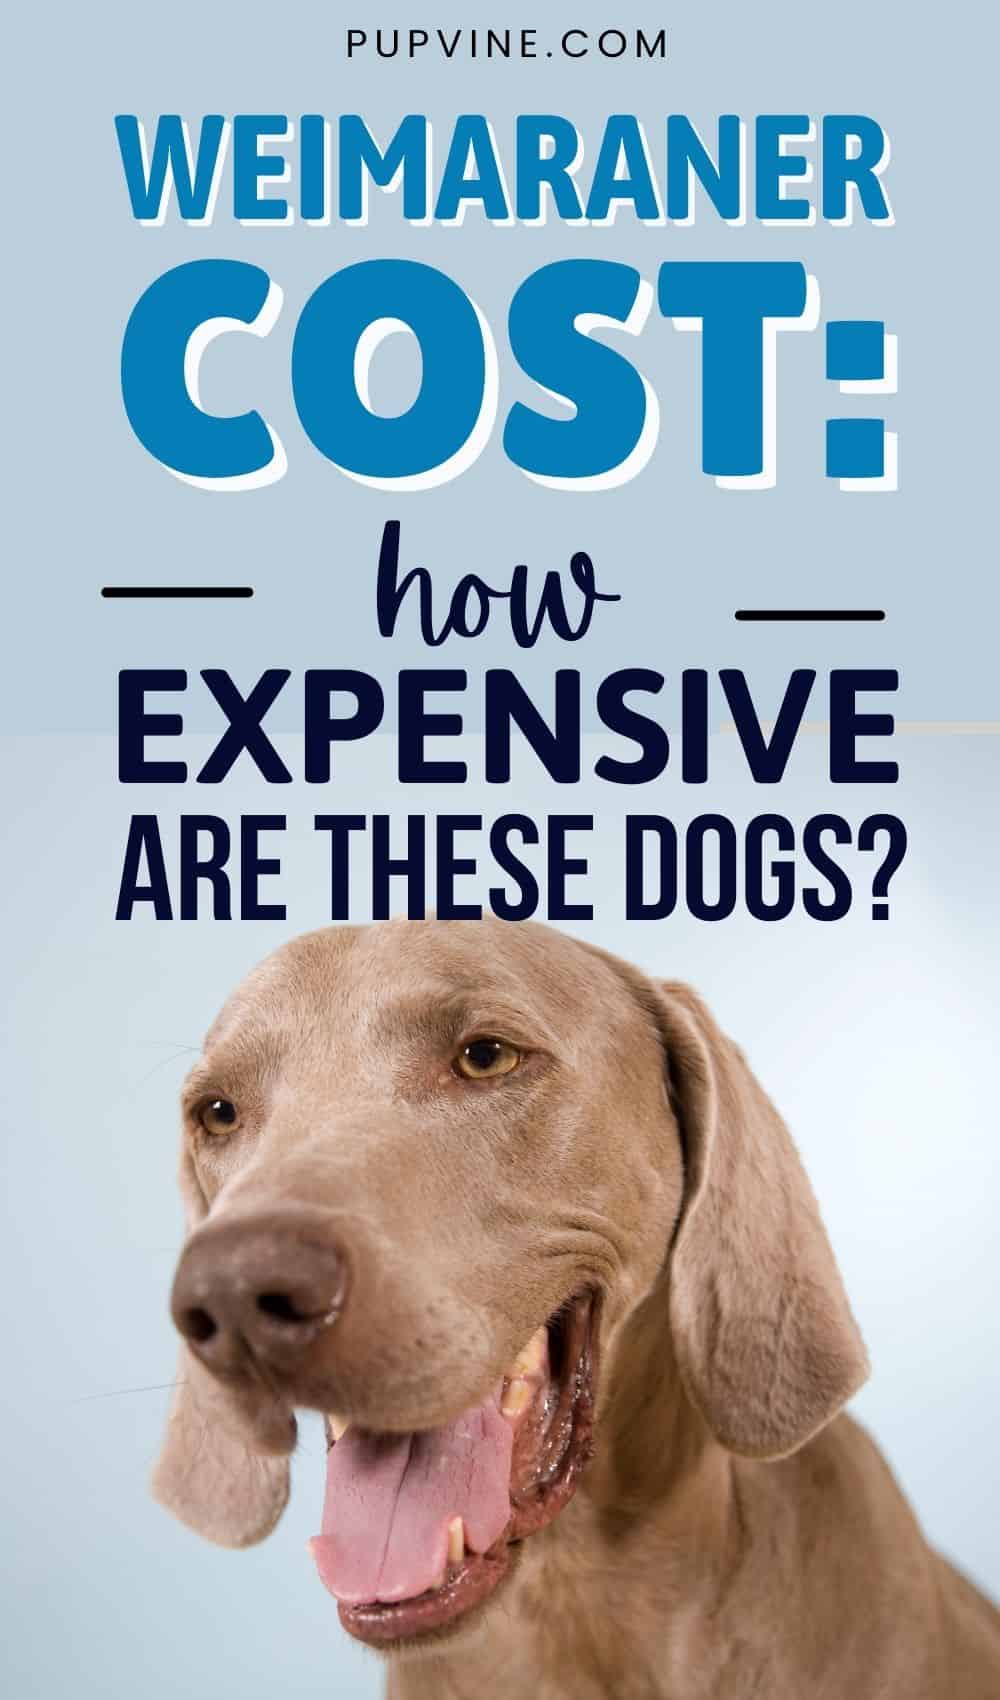 Weimaraner Cost How Expensive Are These Dogs